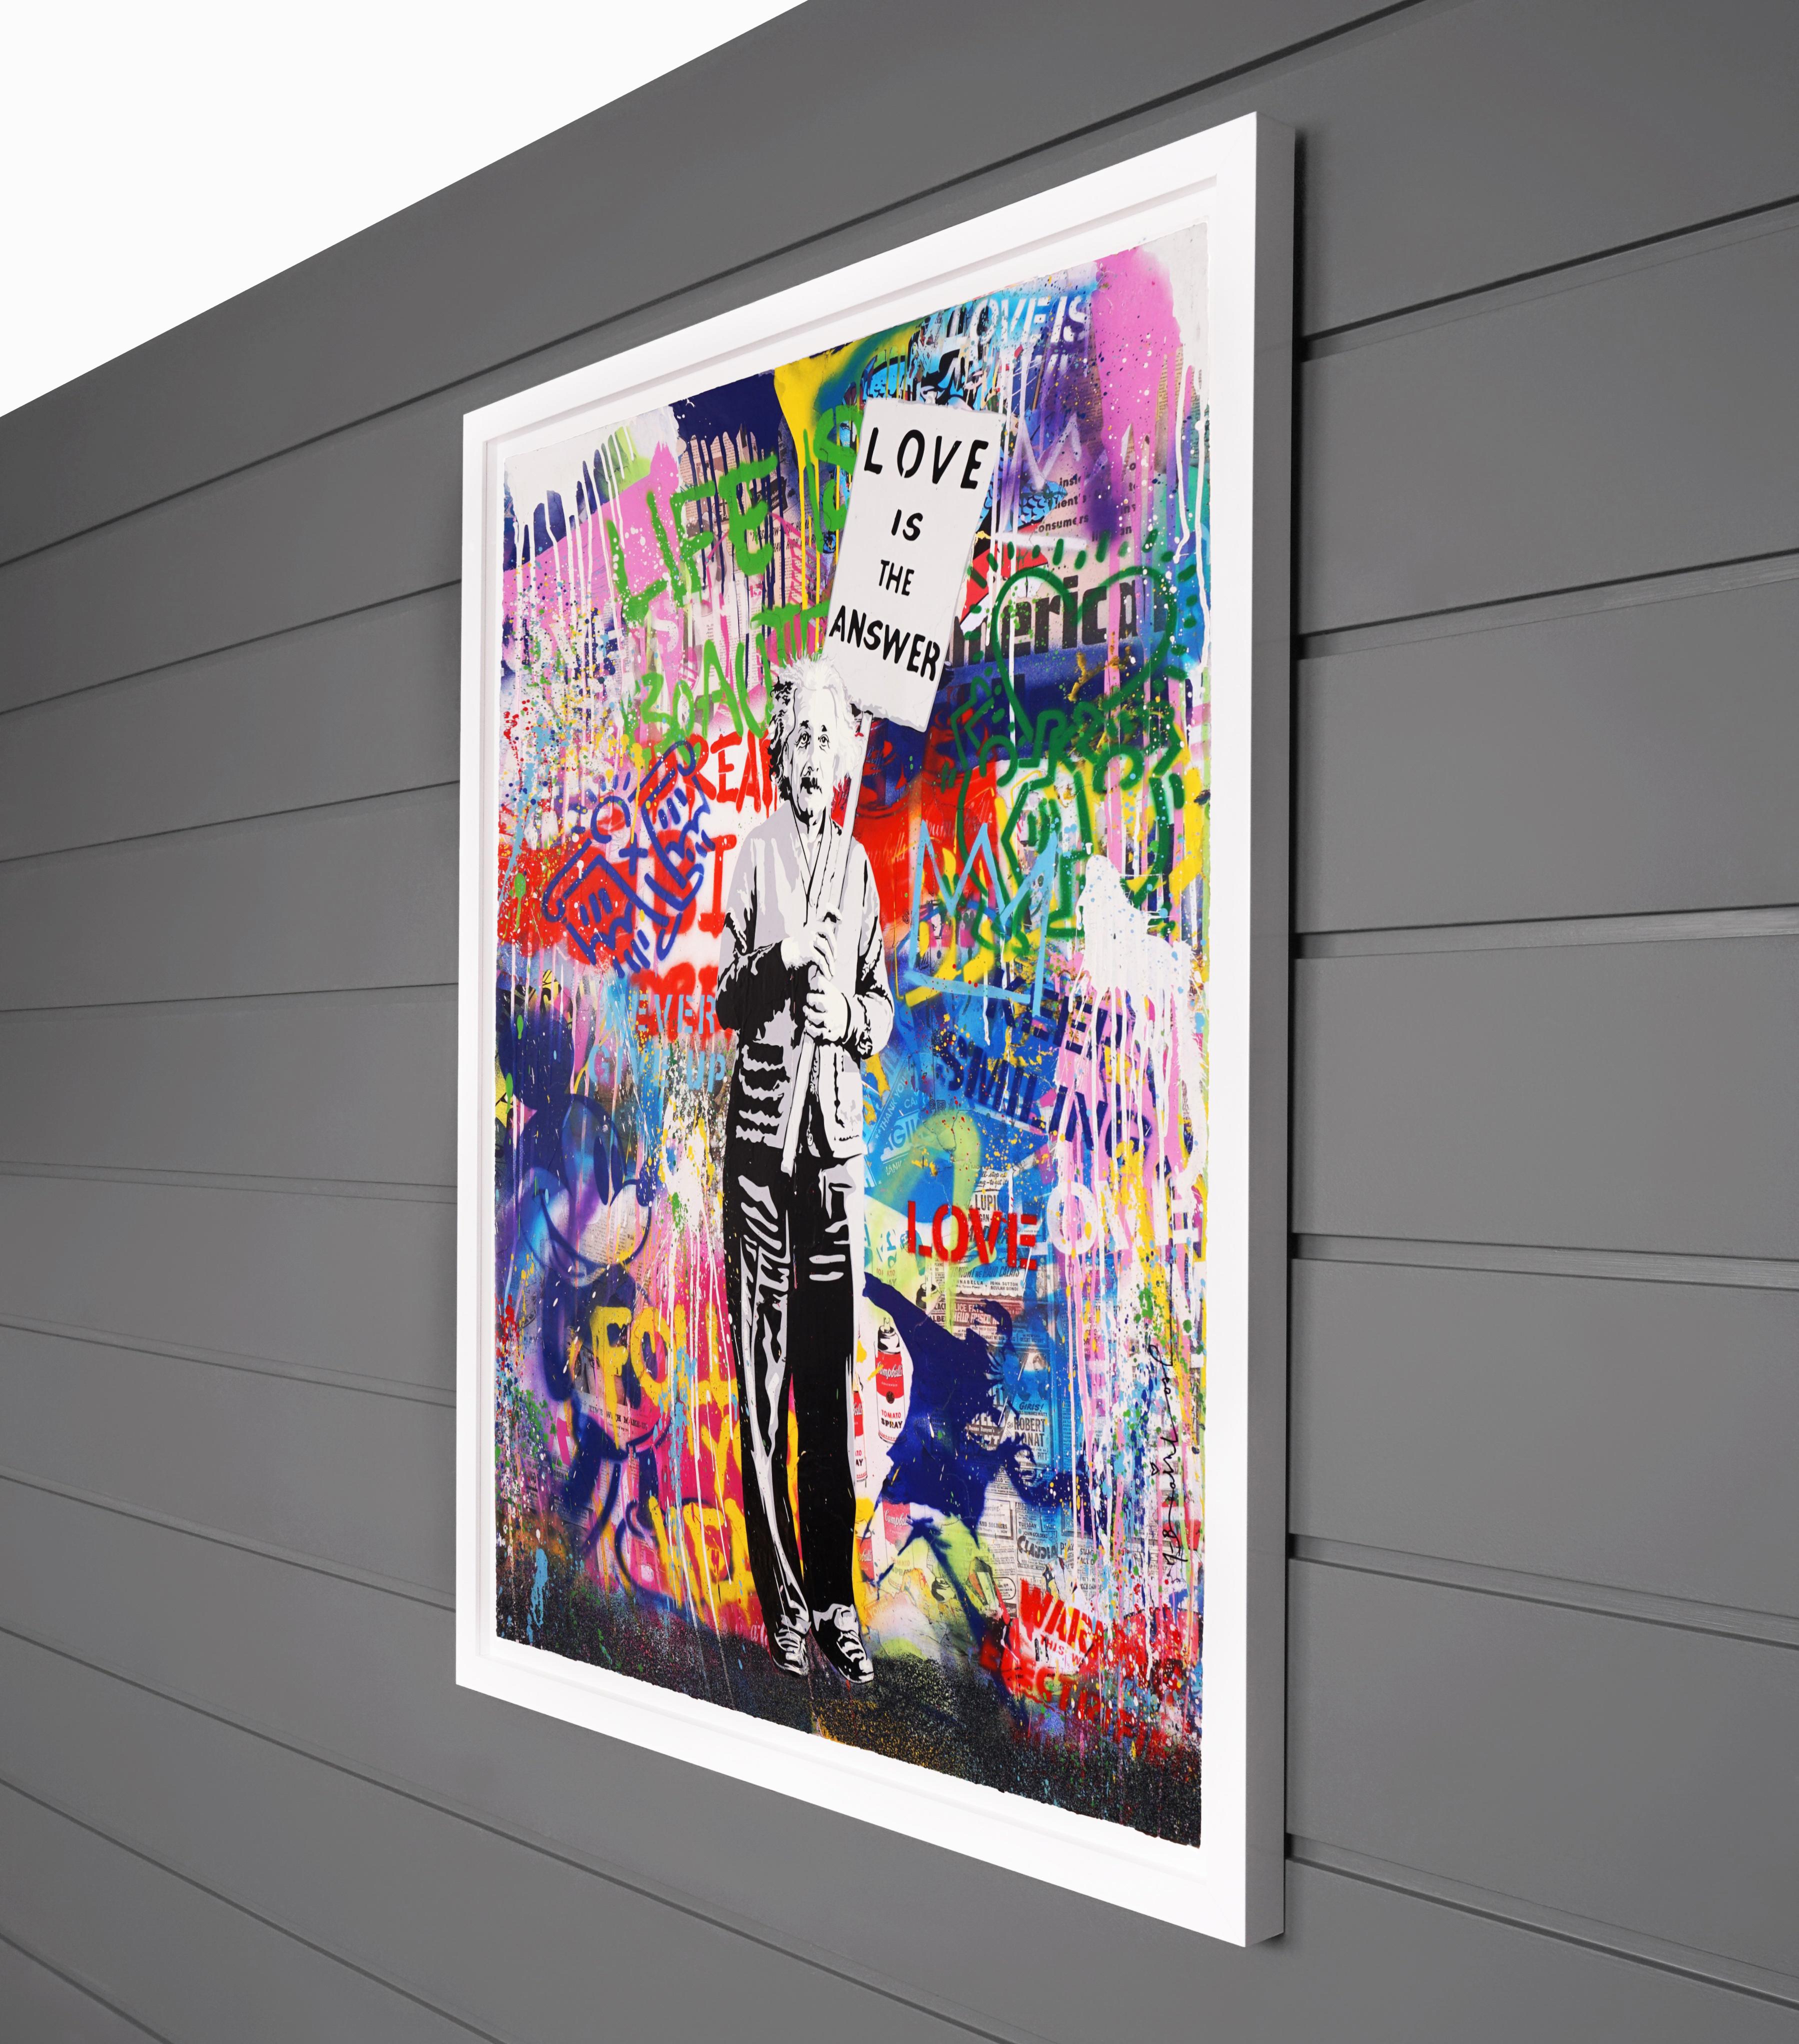 The graffiti street-art meets fine-art 'Love Is The Answer' is a pop art masterpiece made with acrylic paint, stencil, and mixed media on paper, created in 2021 by contemporary street-artist, Mr. Brainwash. The bold stenciled text, layers of